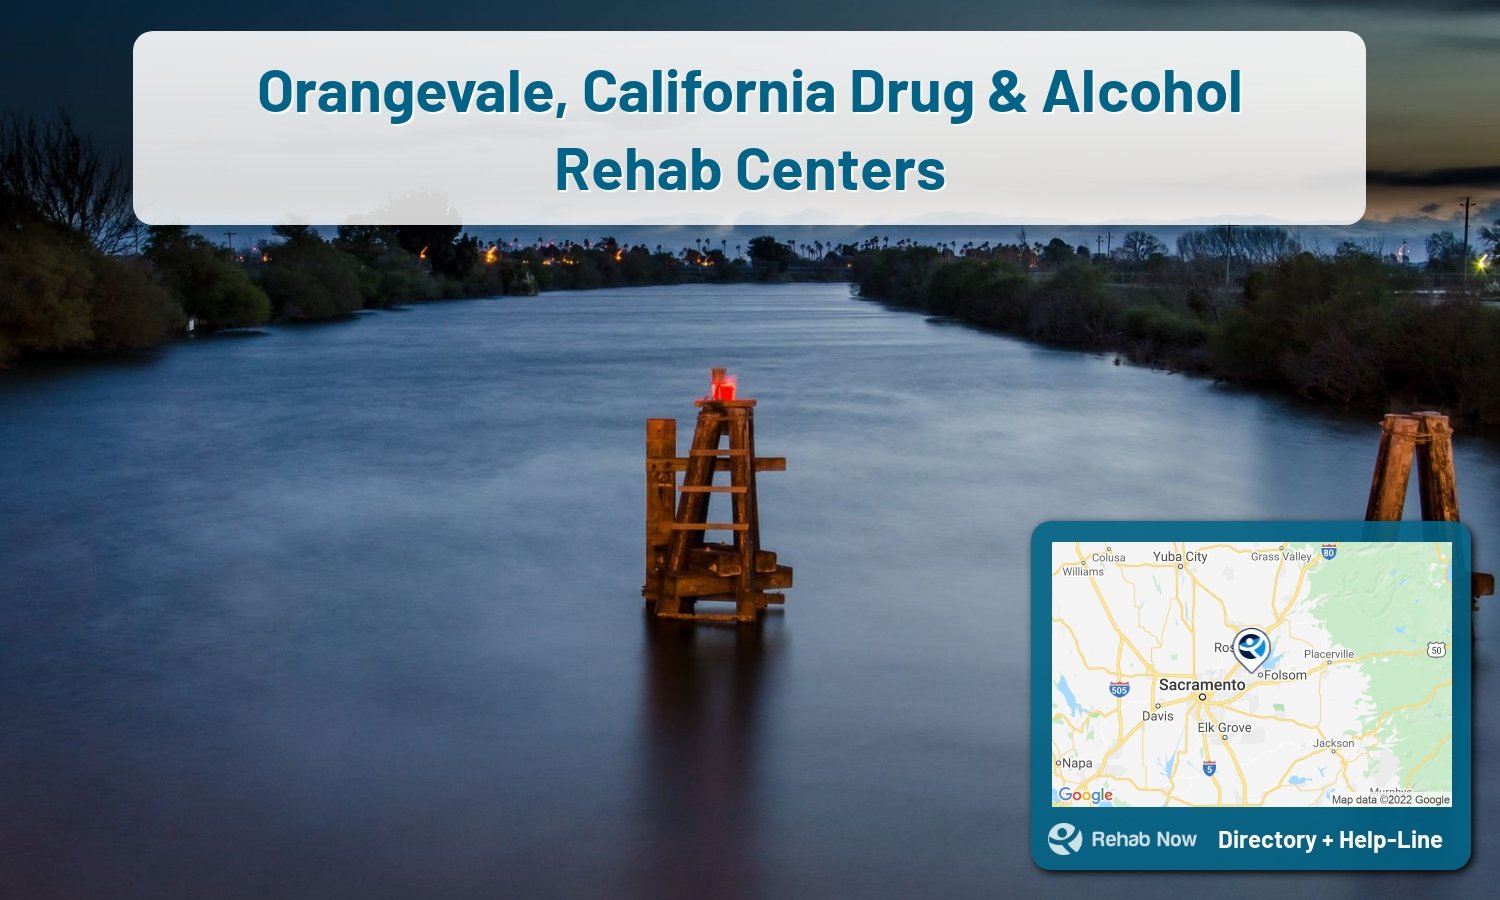 Orangevale, CA Treatment Centers. Find drug rehab in Orangevale, California, or detox and treatment programs. Get the right help now!